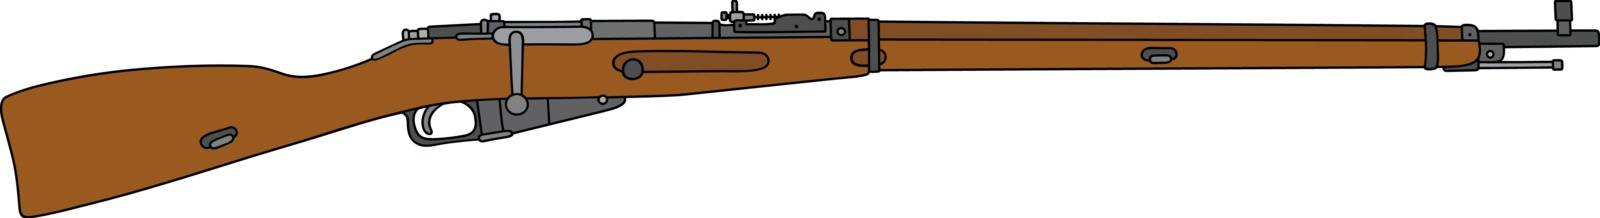 Old military rifle by vostal